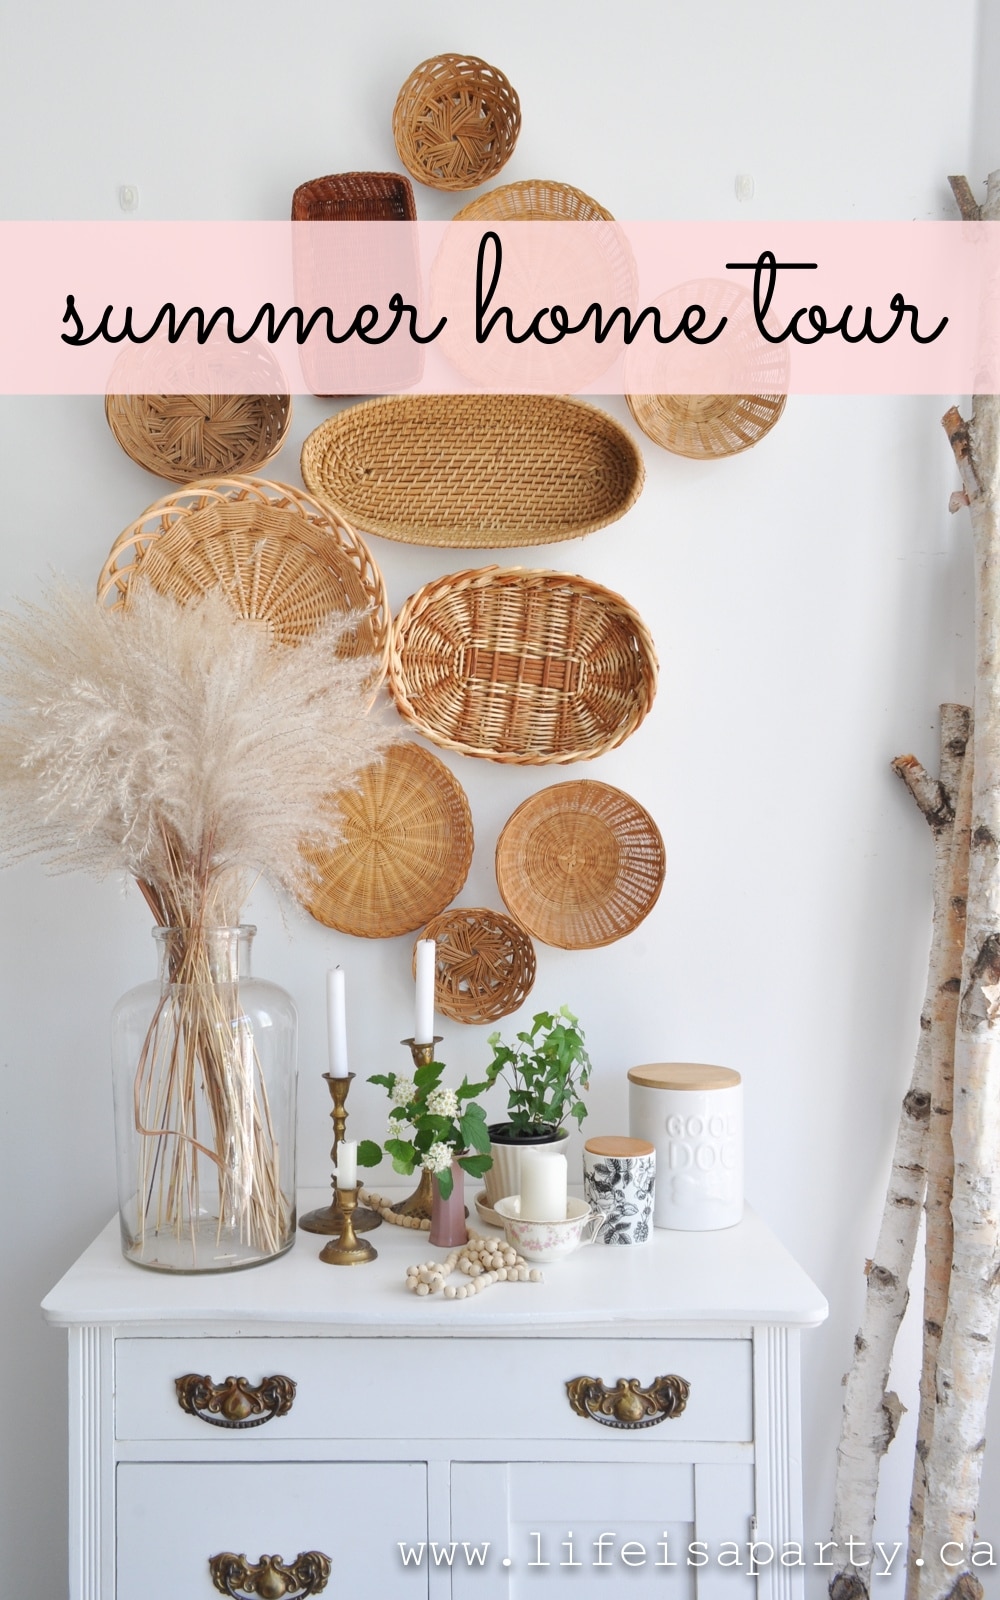 Boho Summer Home Tour: we've added in lots of plants, wicker baskets, candles, brass, fringe, and macrame for a the perfect relaxed boho summer decor.